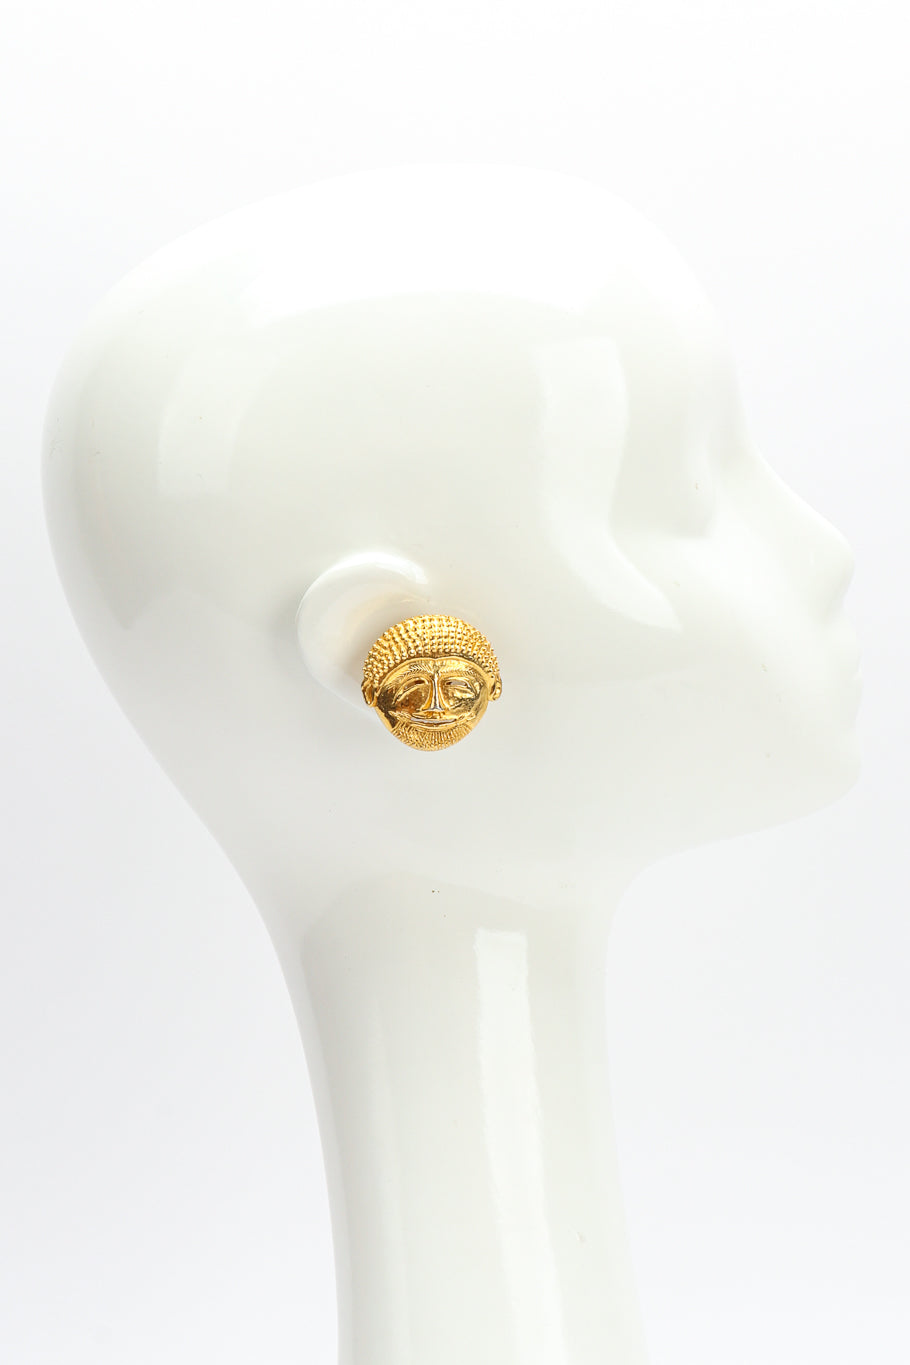 Mask earrings by Isabel Canovas on white background on mannequin head  @recessla